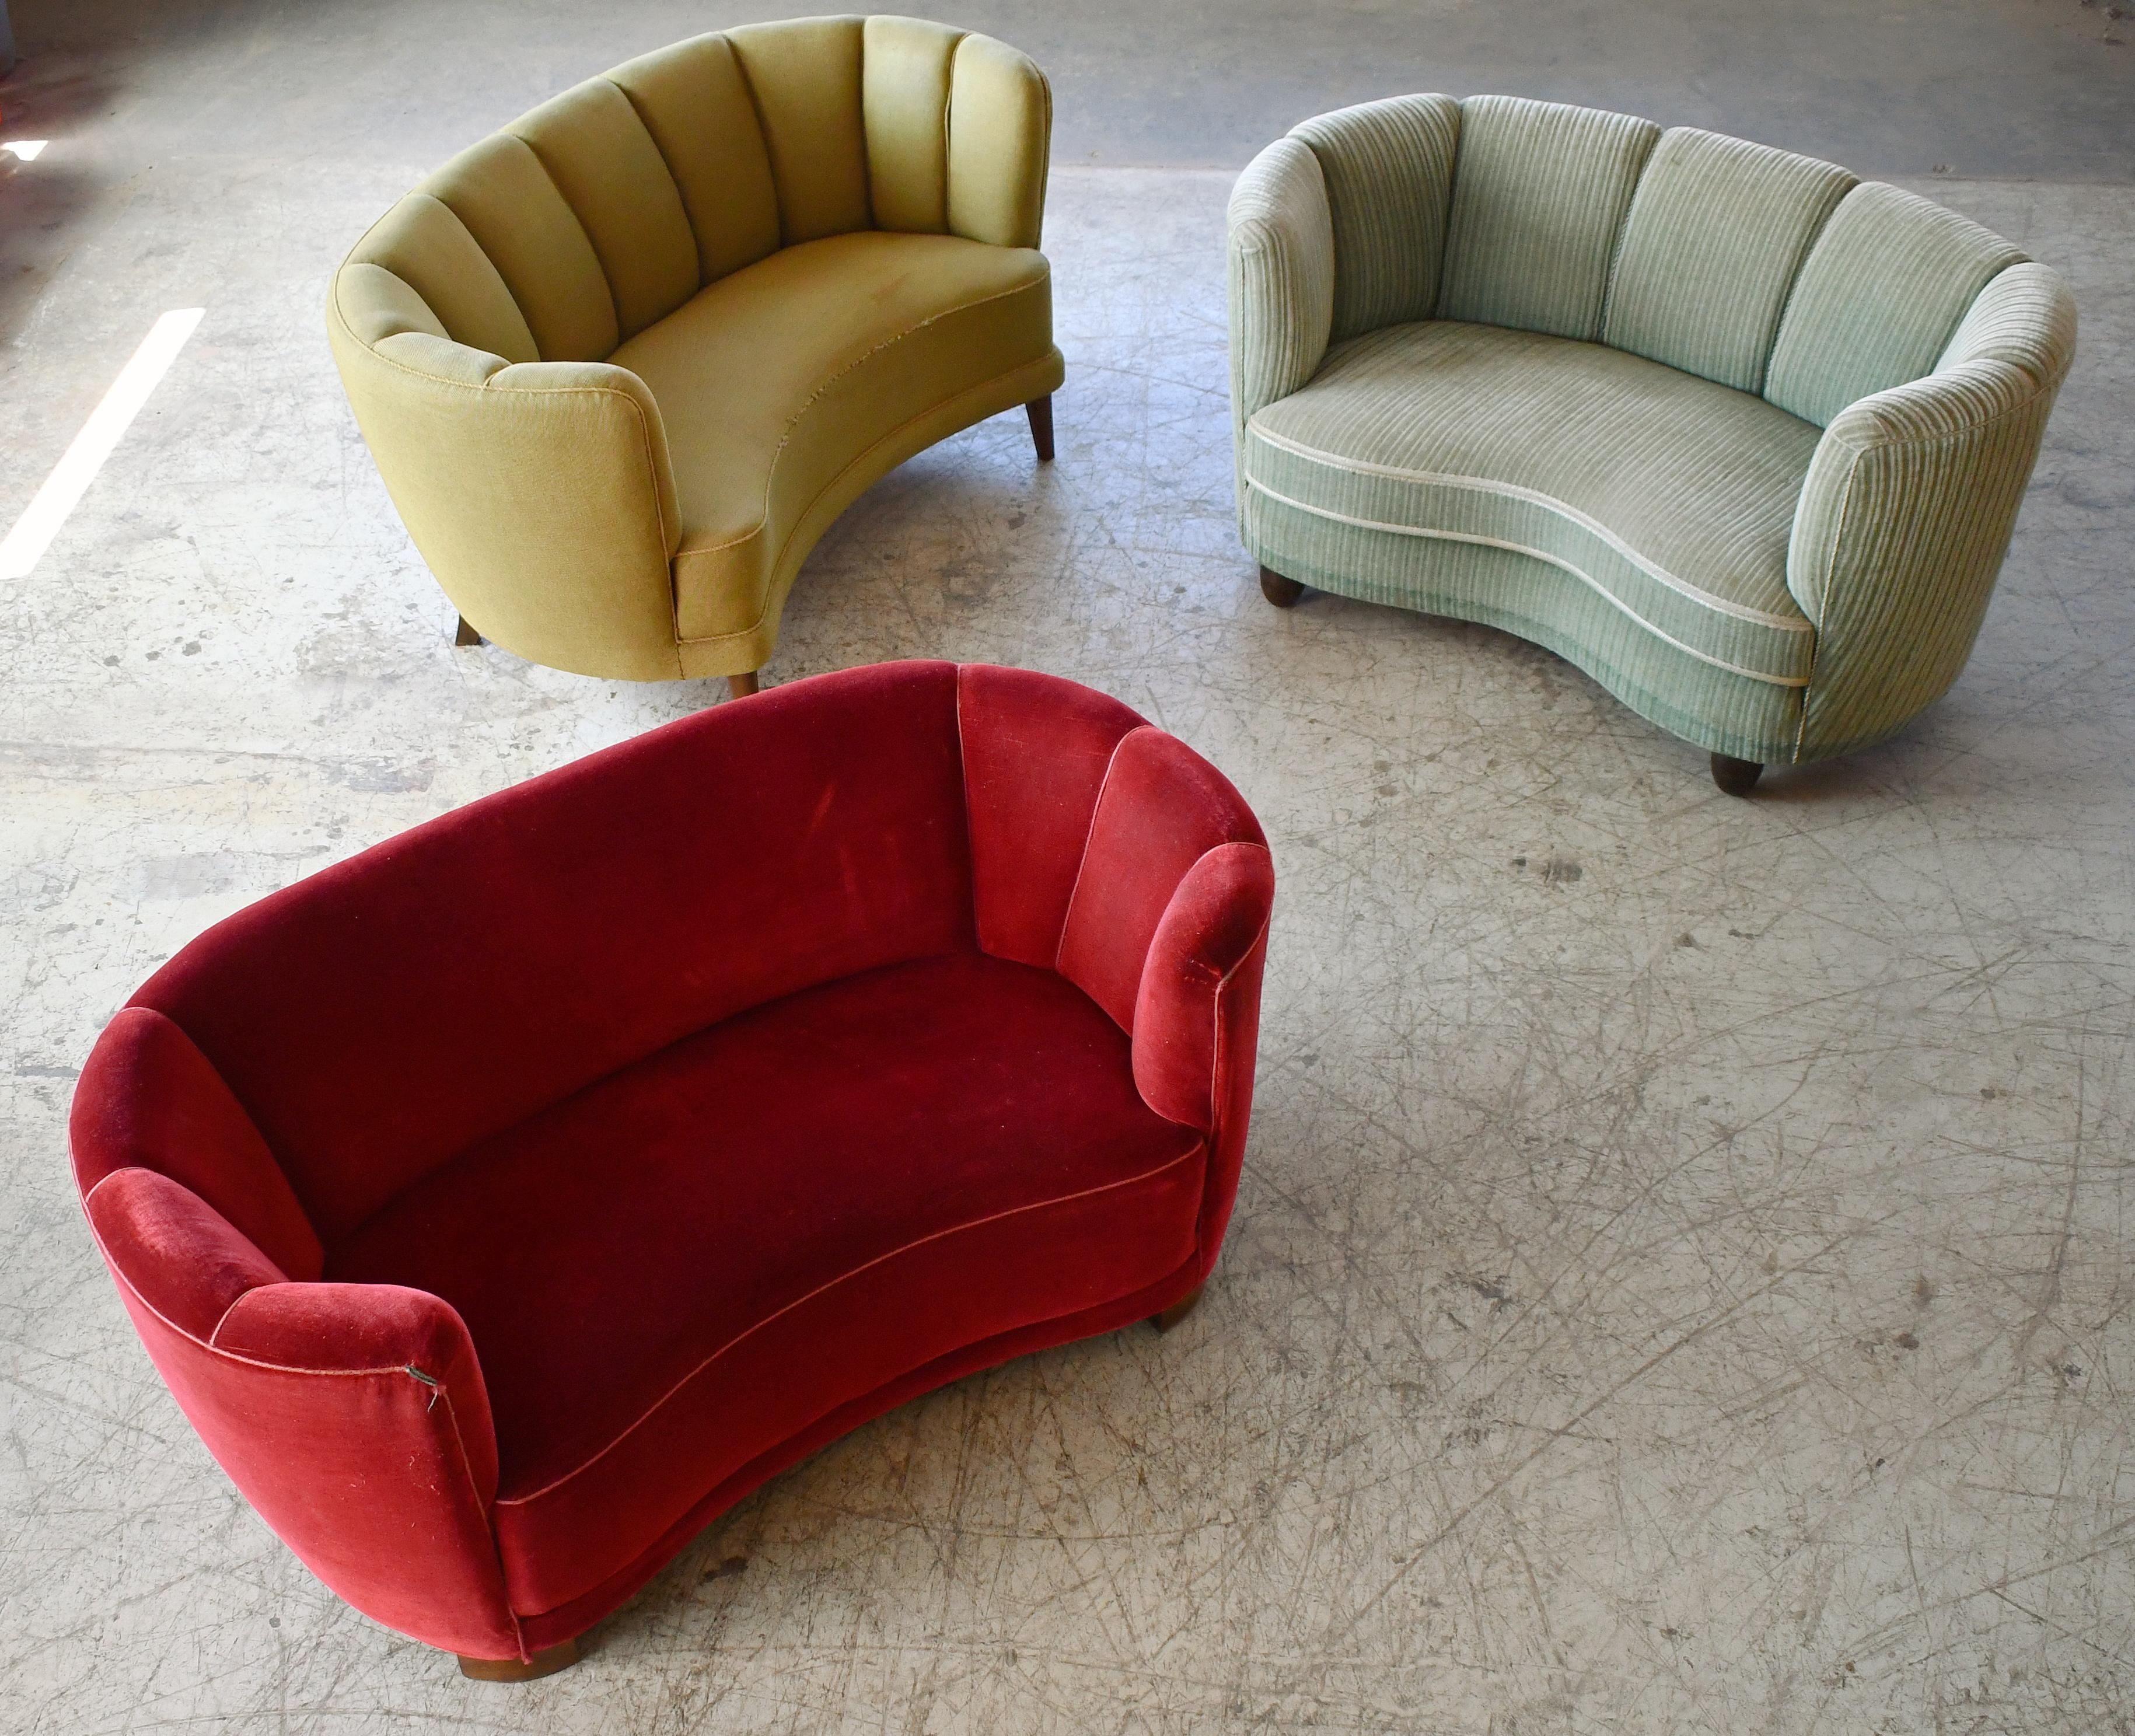 Viggo Boesen style banana shaped or curved Loveseat made in Denmark, around late 1930s or early 1940s. These small sofas will make a strong statement in any room. Beautiful round voluptuous lines and solid thick legs. The legs come in various